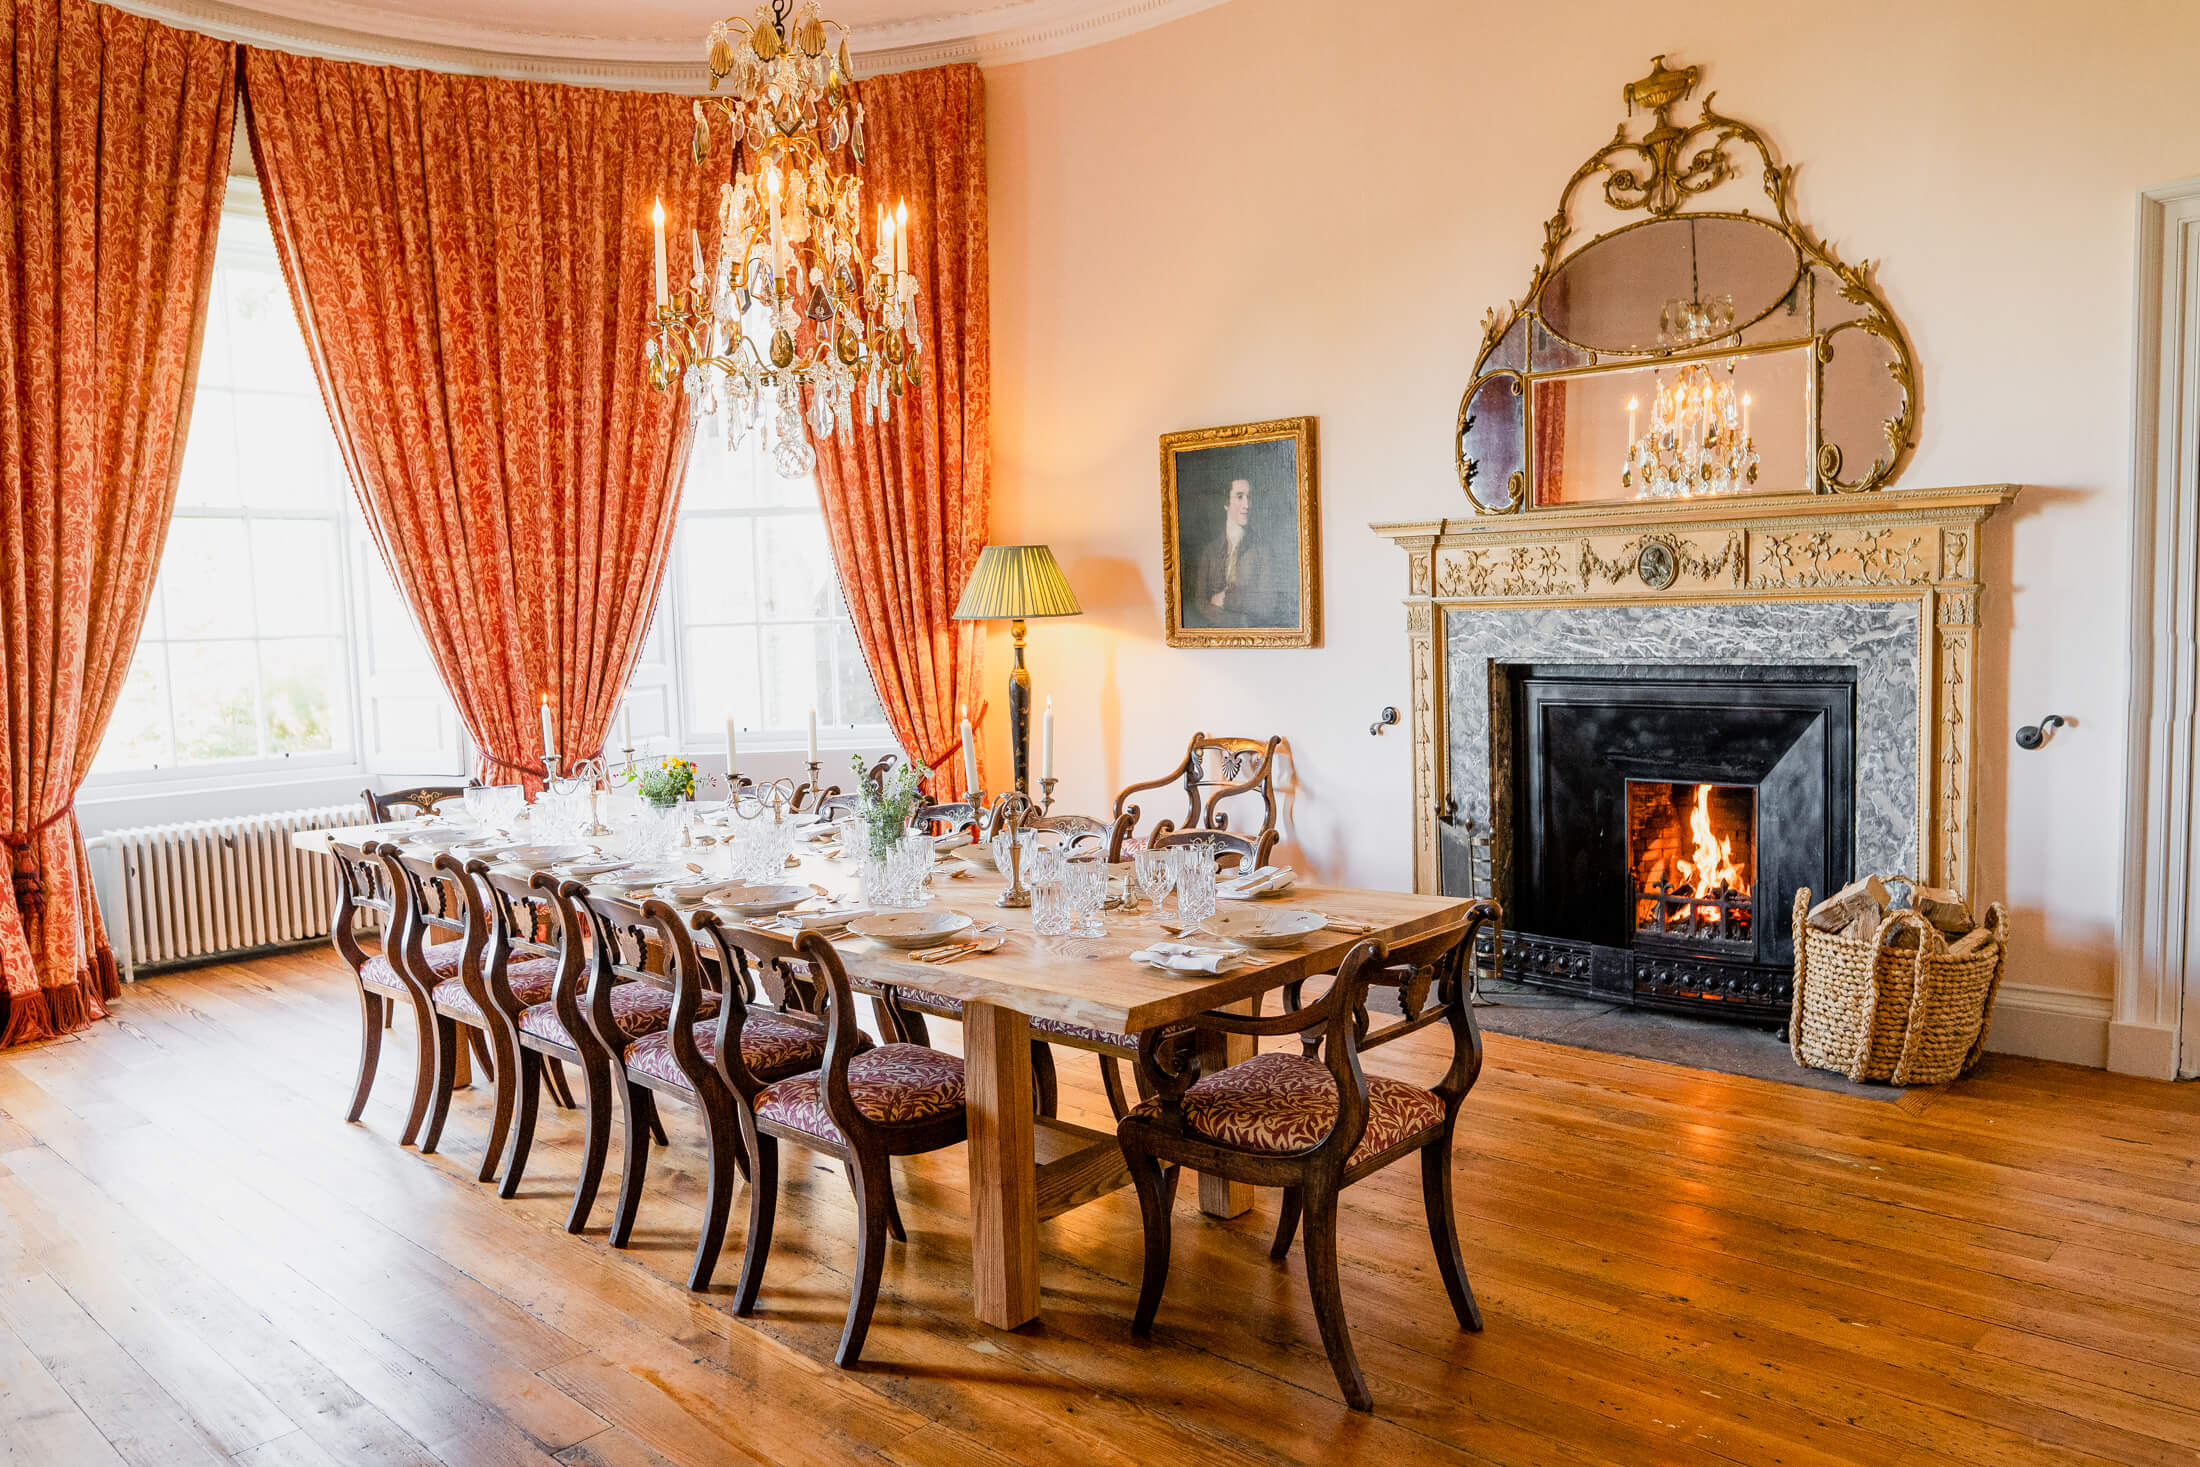 Birkhill Castle - formal dining for all guests and a lovely spot for a wedding breakfast